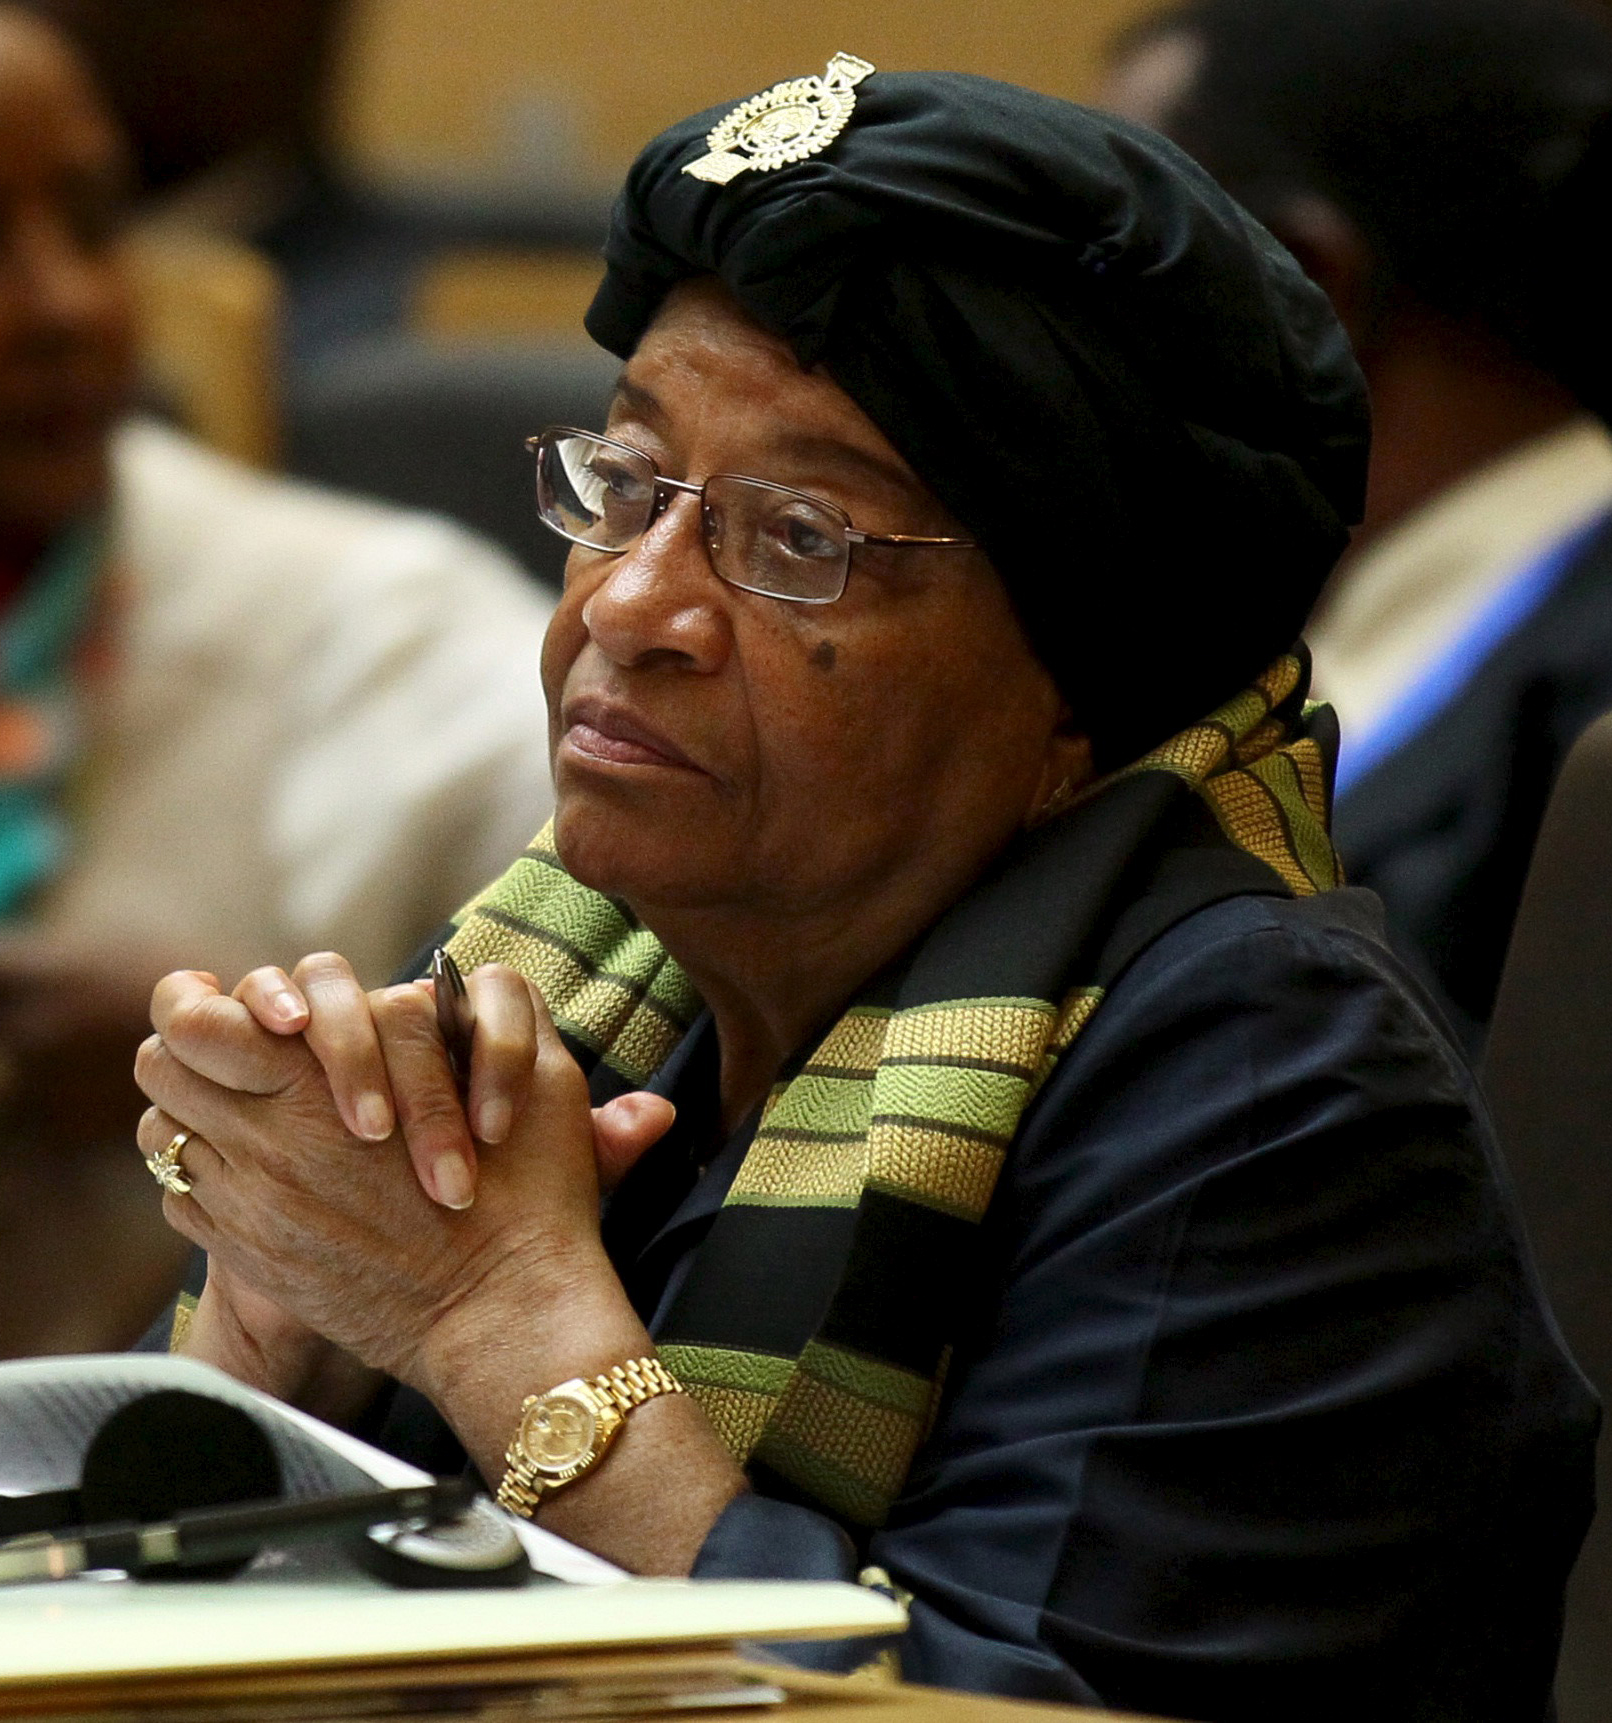 Liberia's President Ellen Johnson-Sirleaf attends the opening ceremony of the 26th Ordinary Session of the Assembly of the African Union (AU) at the AU headquarters in Ethiopia's capital Addis Ababa, January 30, 2016. REUTERS/Tiksa Negeri  - RTX24OAO